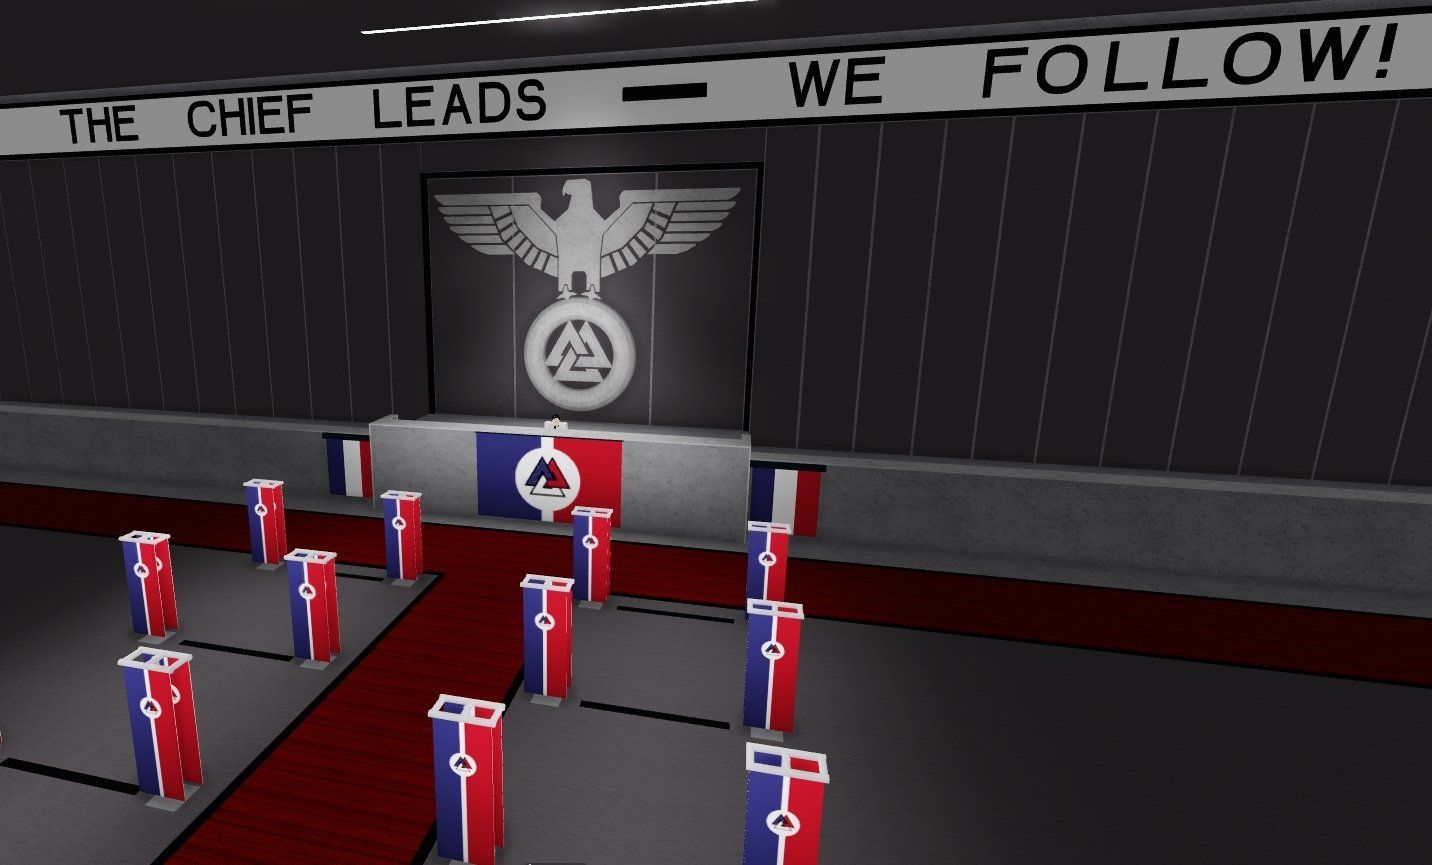 Image of a Valkist convention held in a private Roblox experience, found on the ‘Chiefs’ Twitter